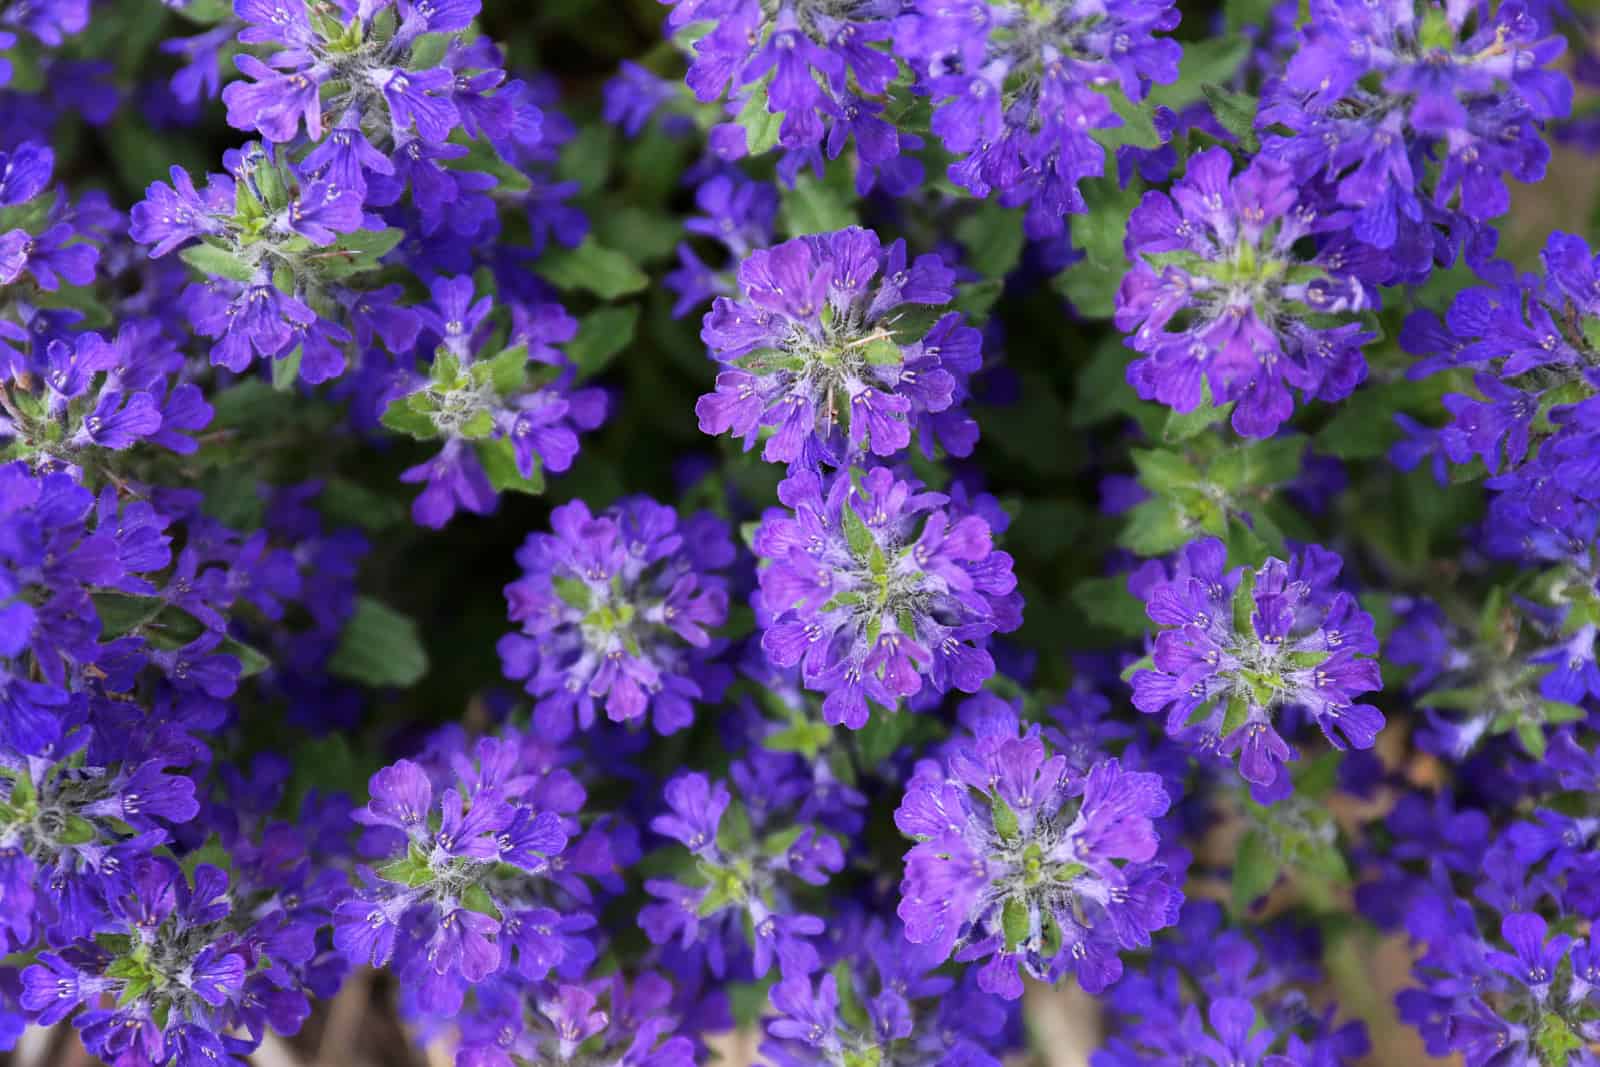 A closeup on the garden plant Purple Ajuga, or Bugleweed groundcover flowers